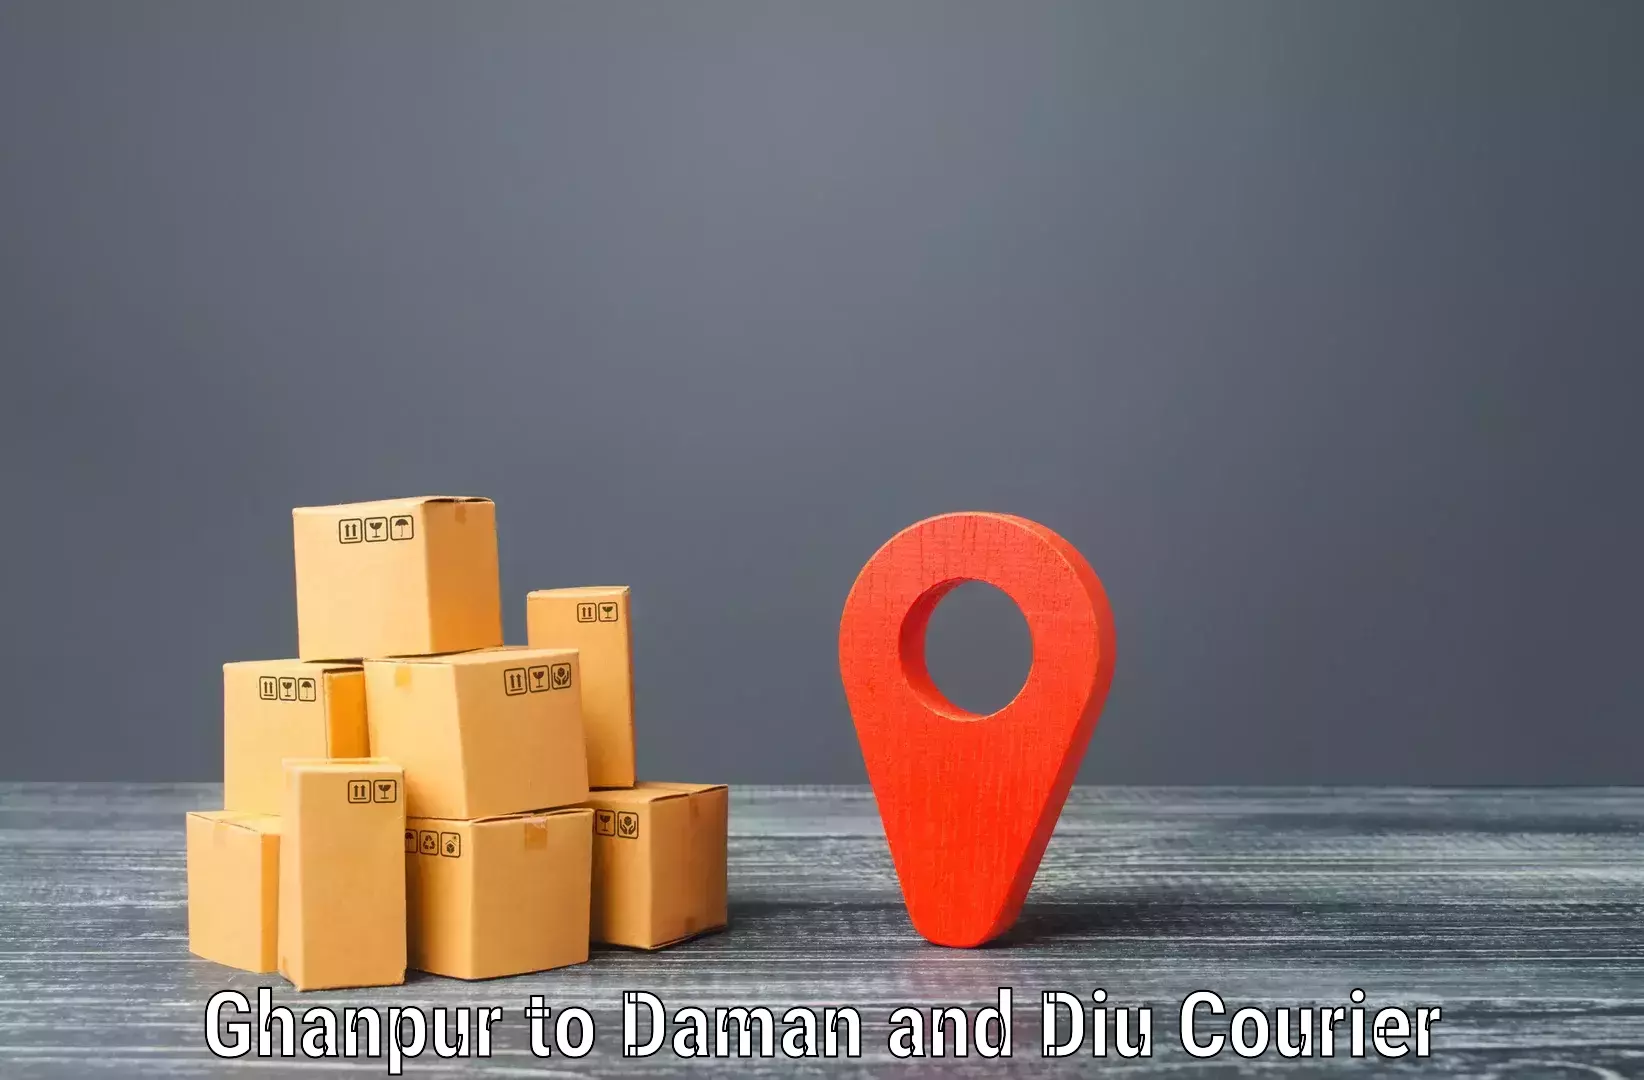 E-commerce fulfillment Ghanpur to Daman and Diu